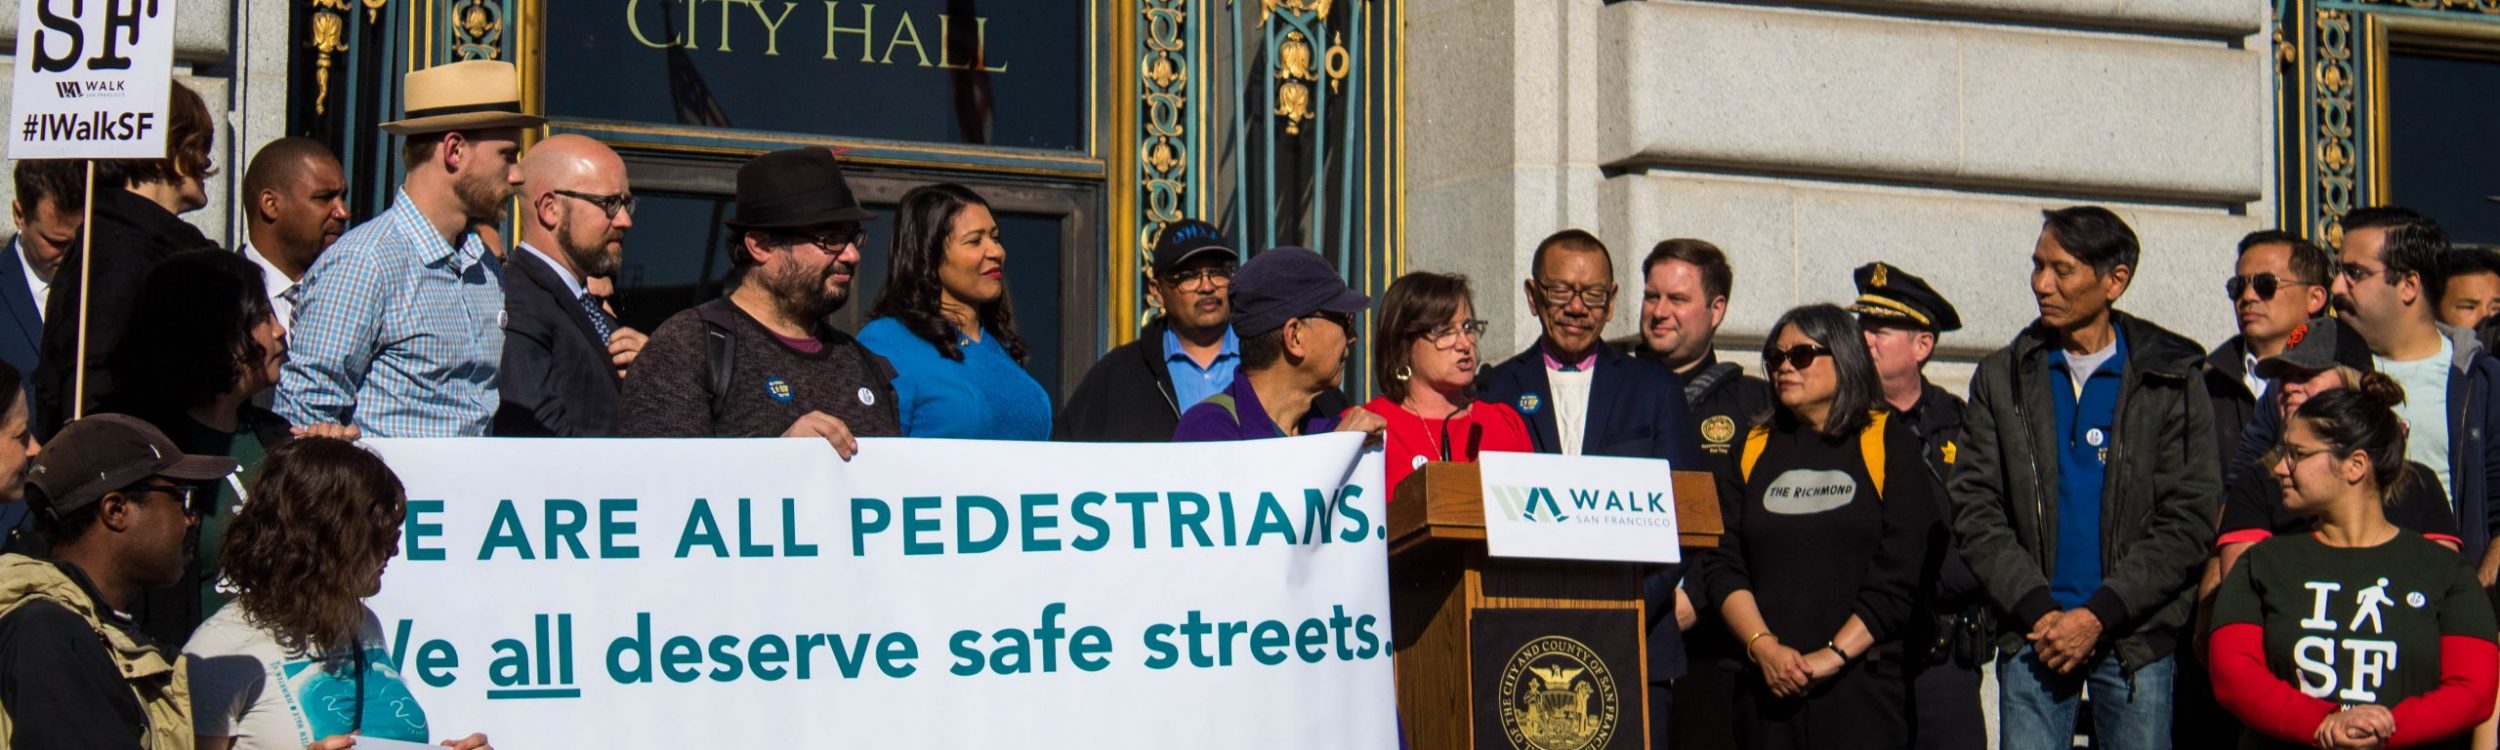 A key way to win big for safe streets: let’s talk on February 24 at 5:30PM